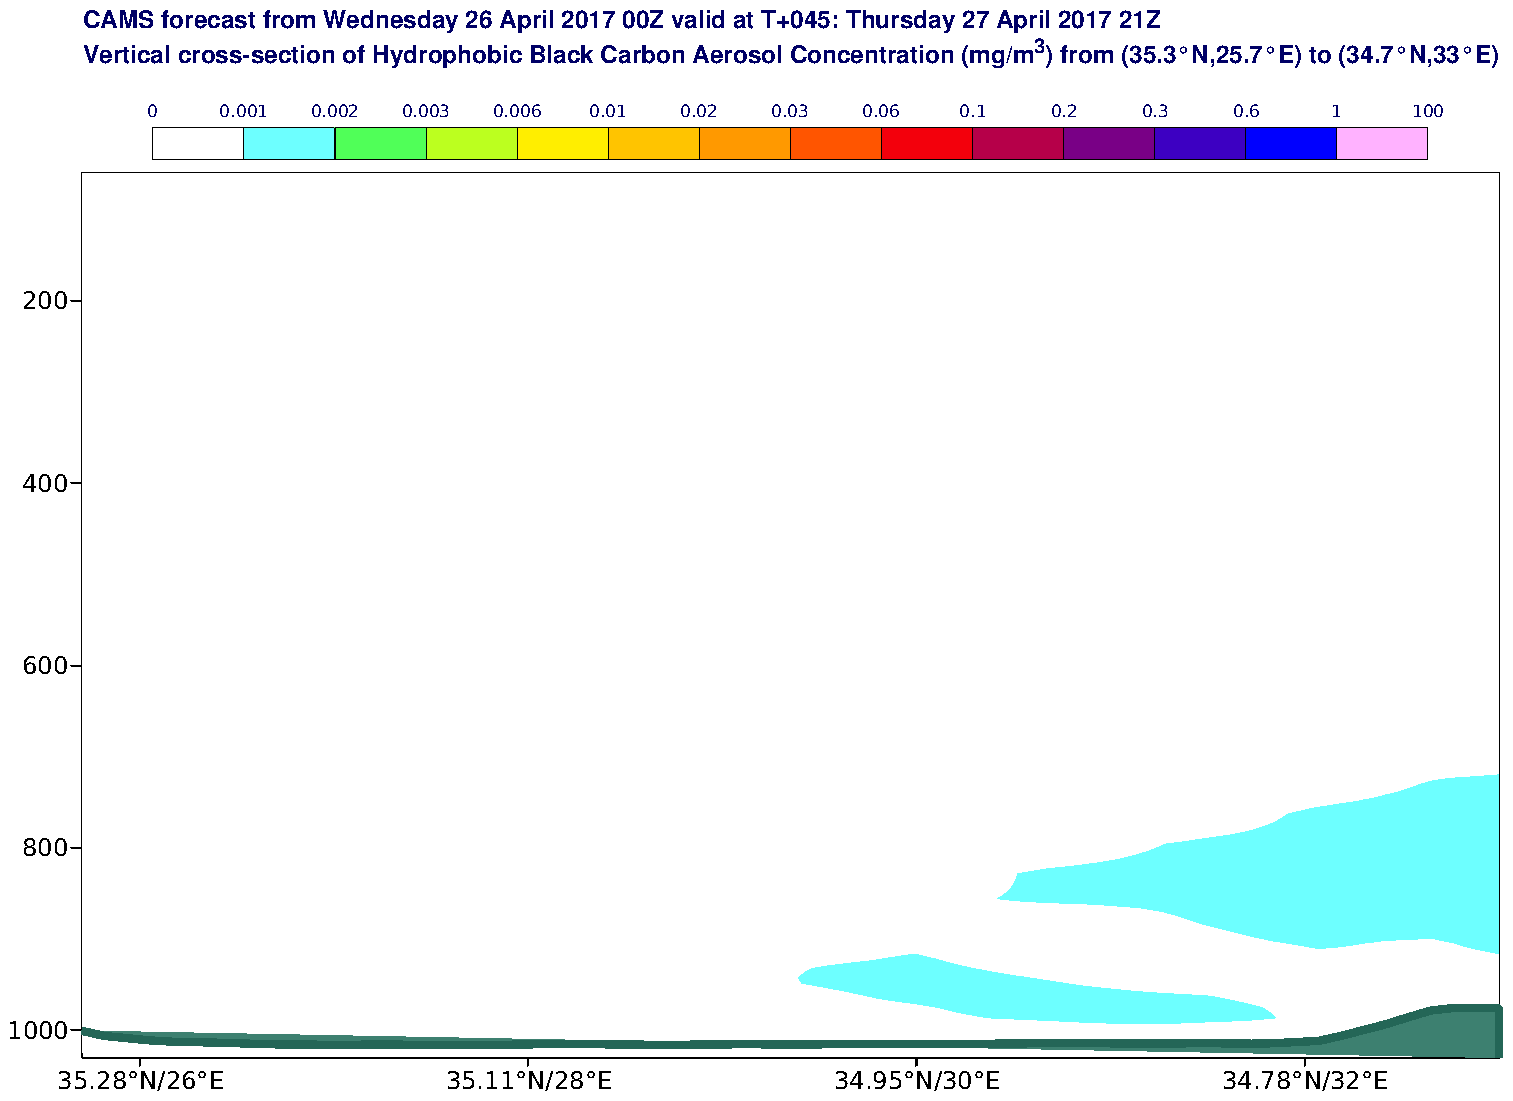 Vertical cross-section of Hydrophobic Black Carbon Aerosol Concentration (mg/m3) valid at T45 - 2017-04-27 21:00